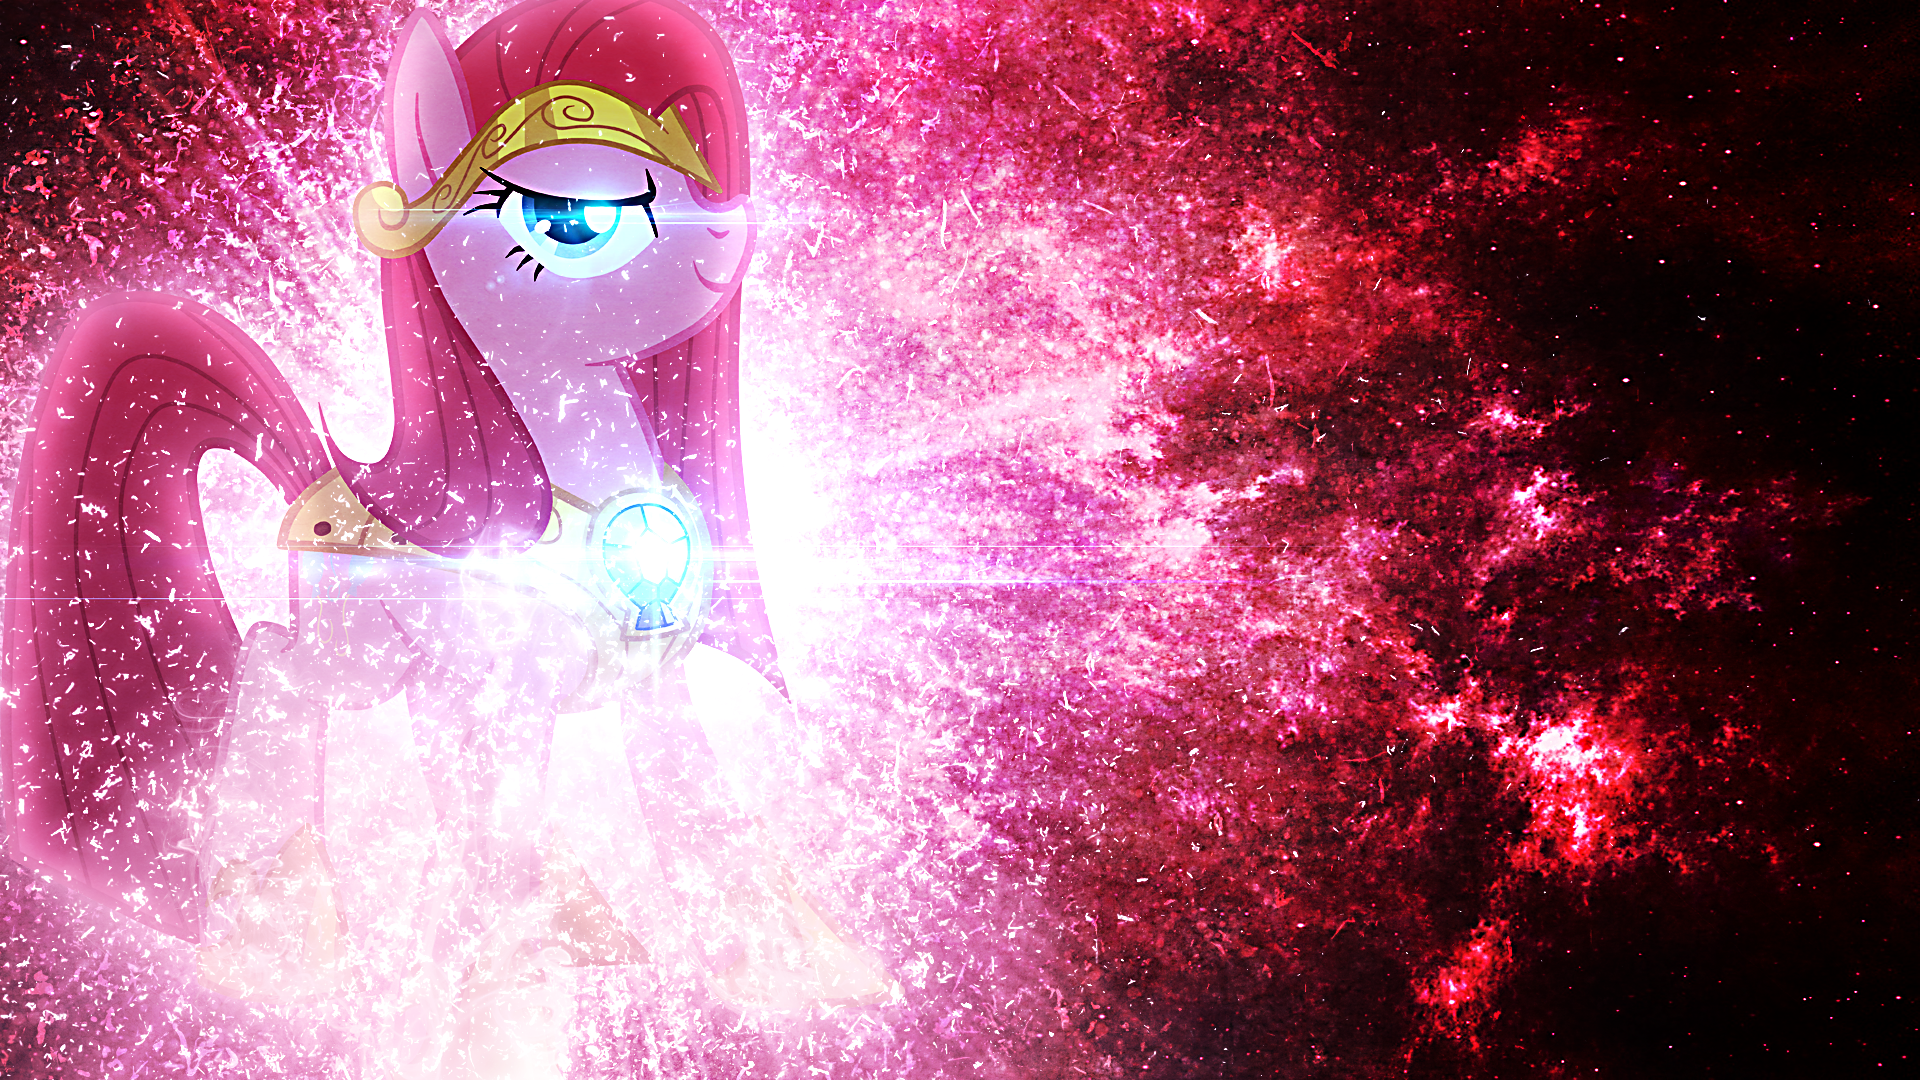 Pinkie Pie Guardian Of Laughter - Wallpaper by Equestria-Prevails, JennieOo and Tzolkine